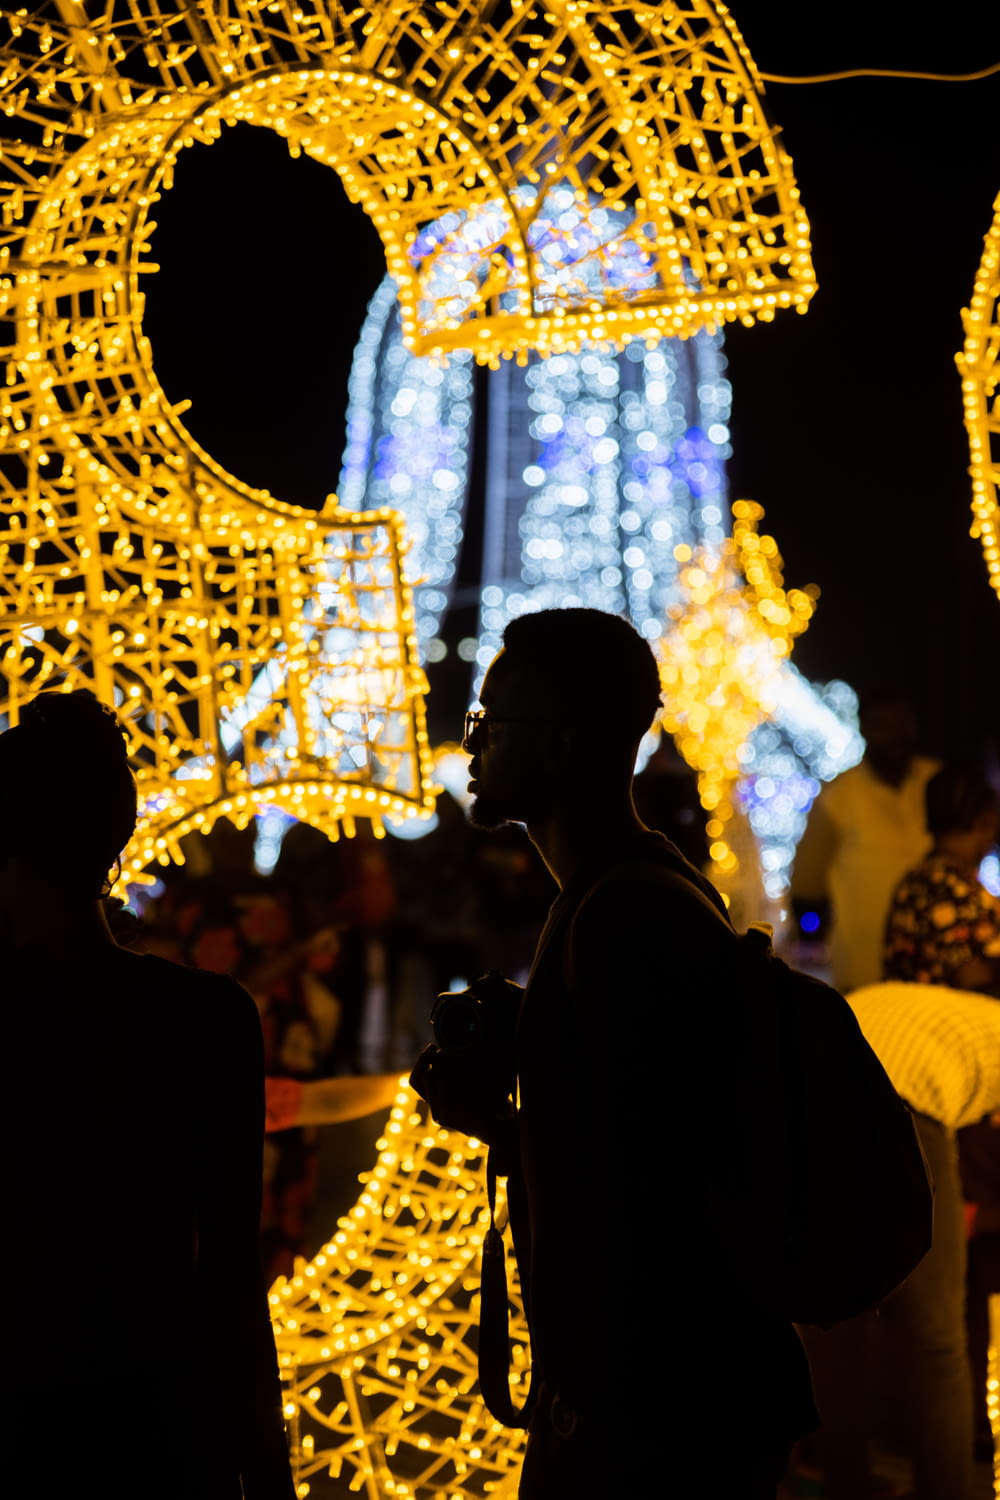 a man is standing in front of a display of lights